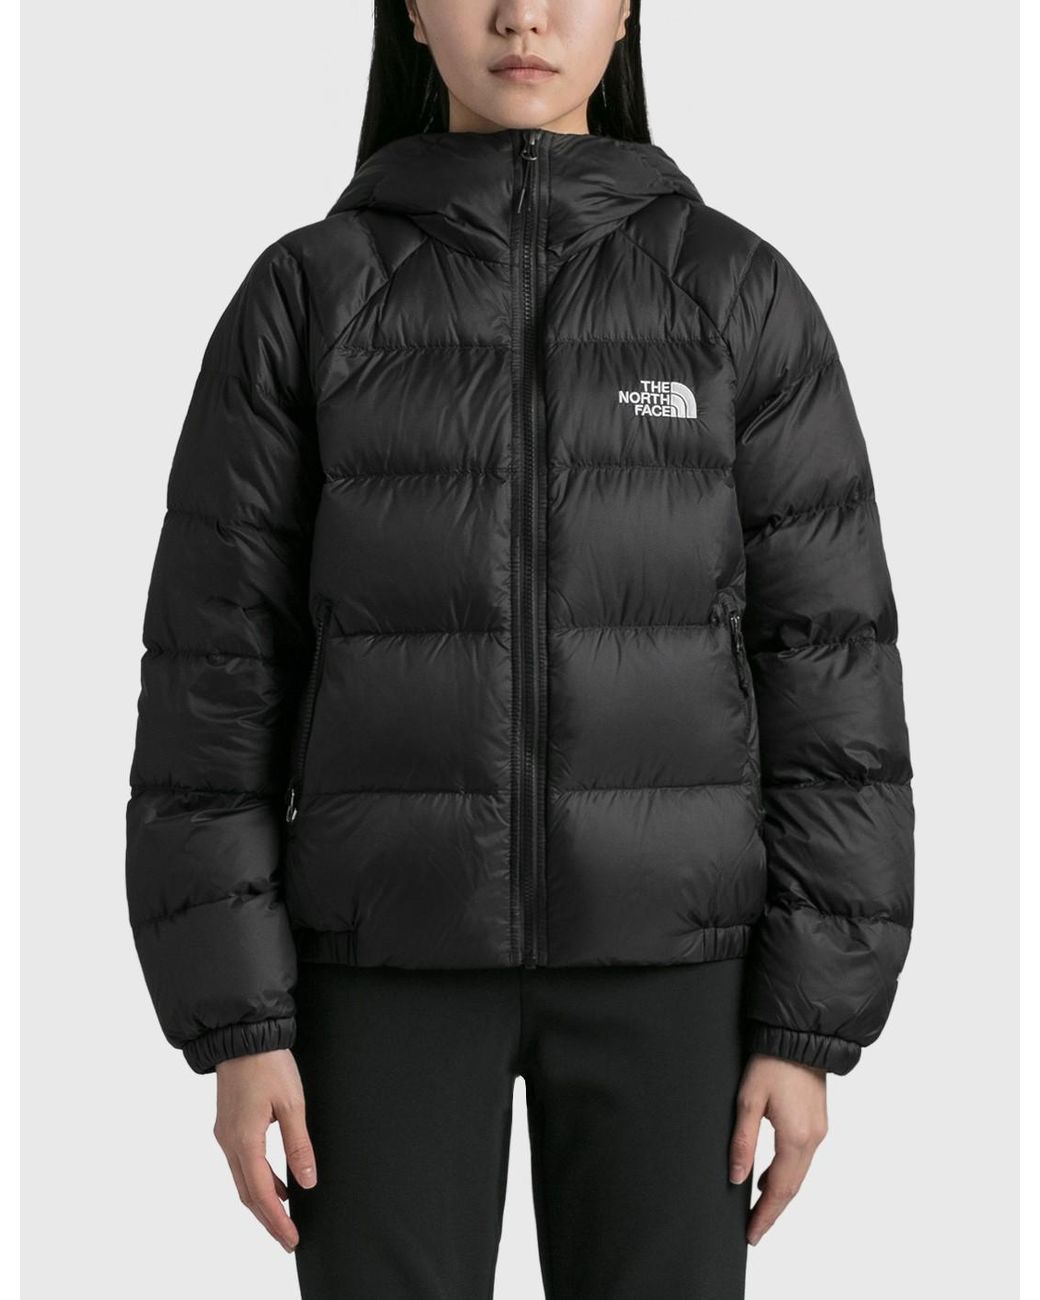 The North Face Hydrenalite Down Hoodie in Black | Lyst